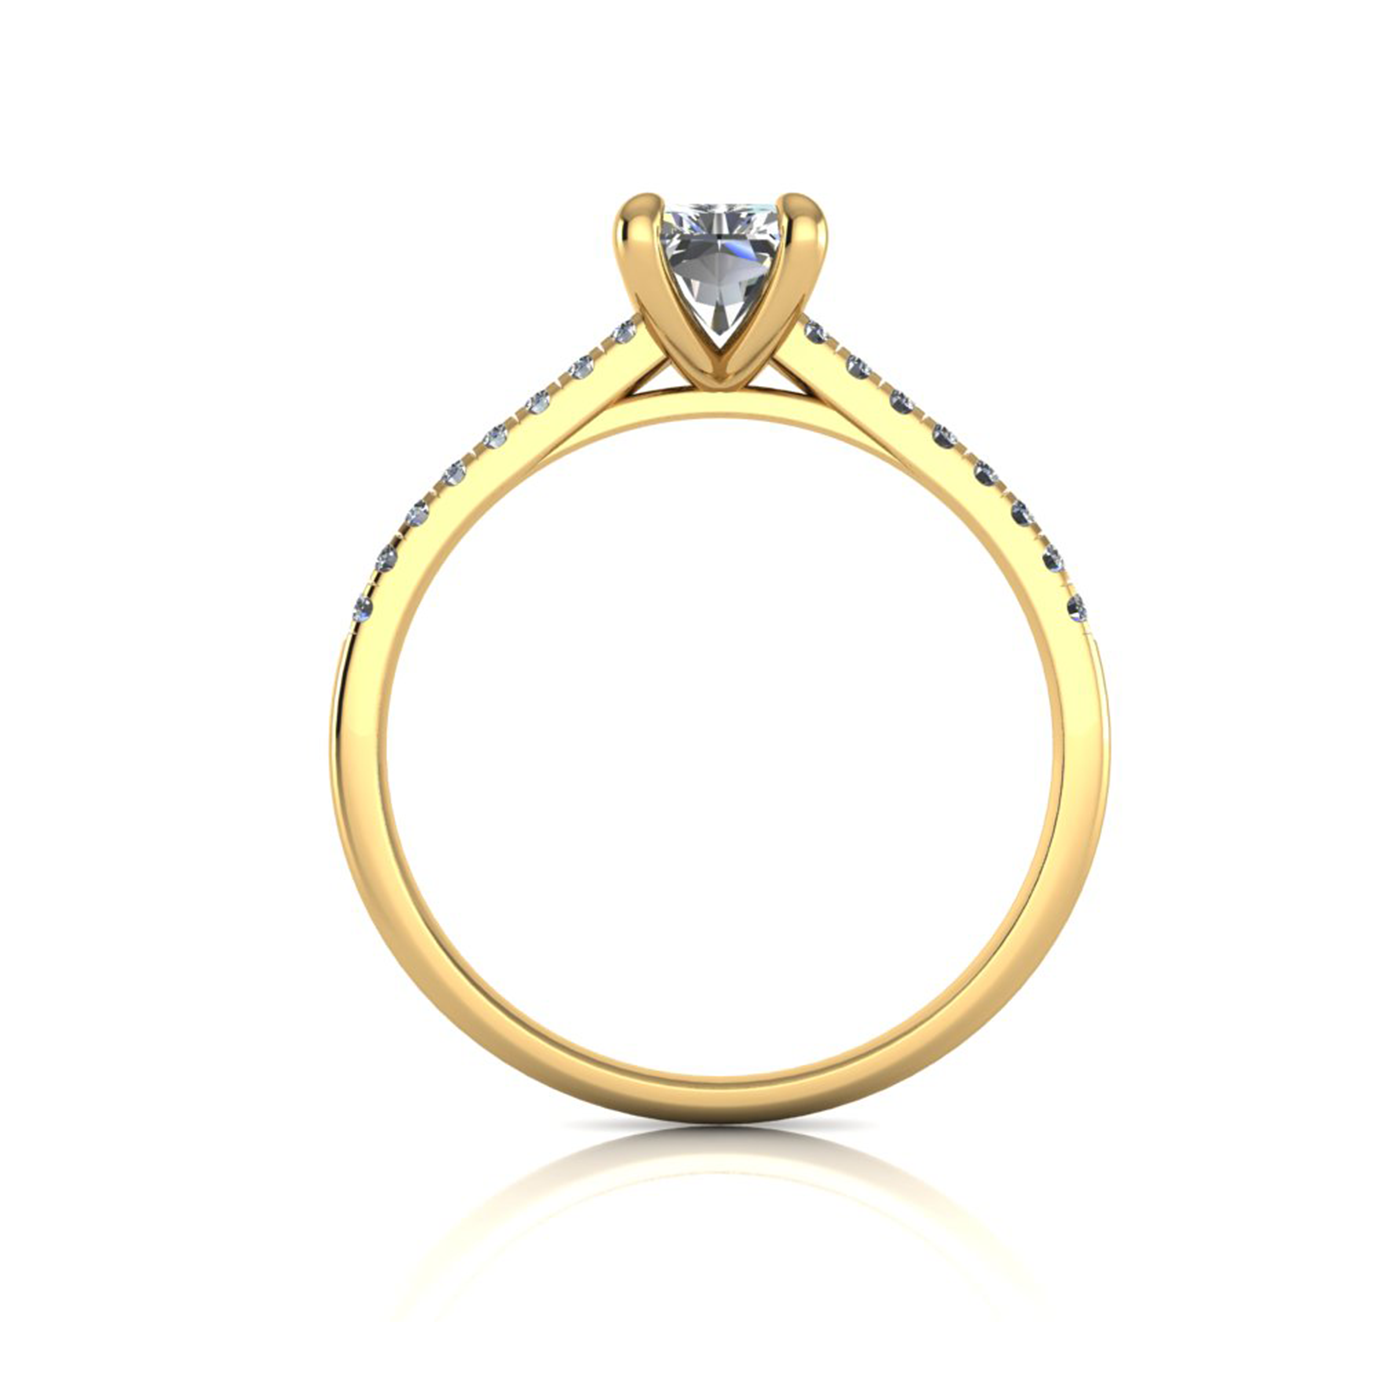 18k yellow gold  1,00 ct 4 prongs radiant cut diamond engagement ring with whisper thin pavÉ set band